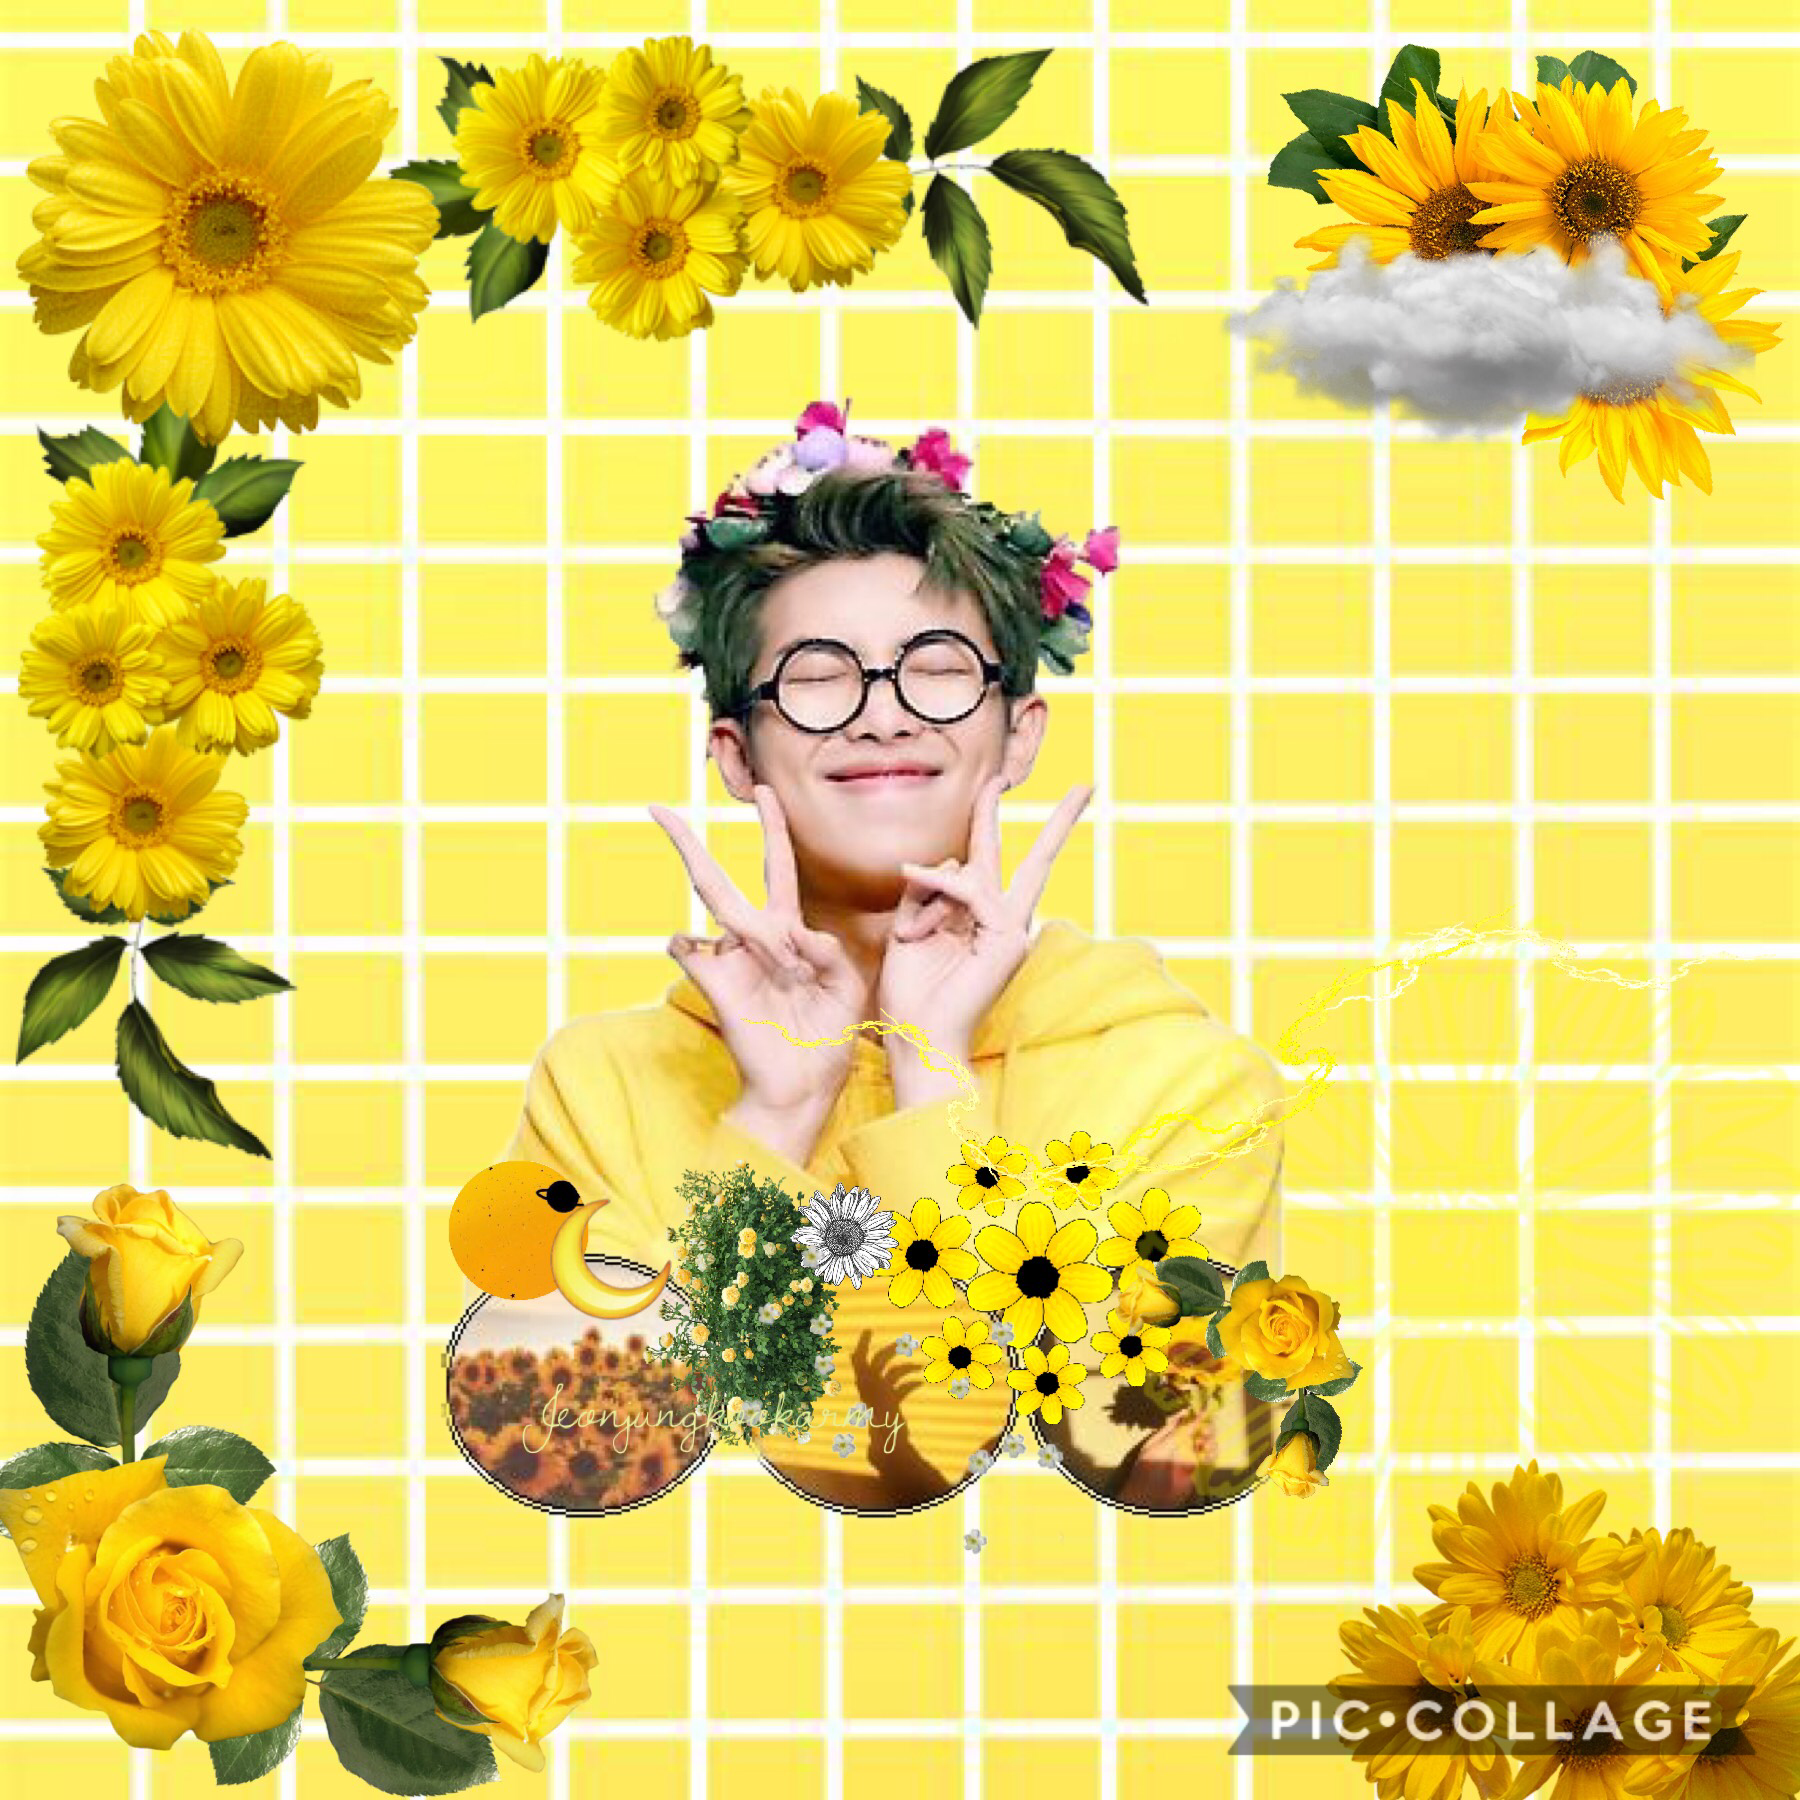 🌻tap🌻
Hello
I think this is my last post until August 
Because I have one more week of school
But I still have my other account @whyyousad
Sooo yeah luv you kookies!!
Bye~